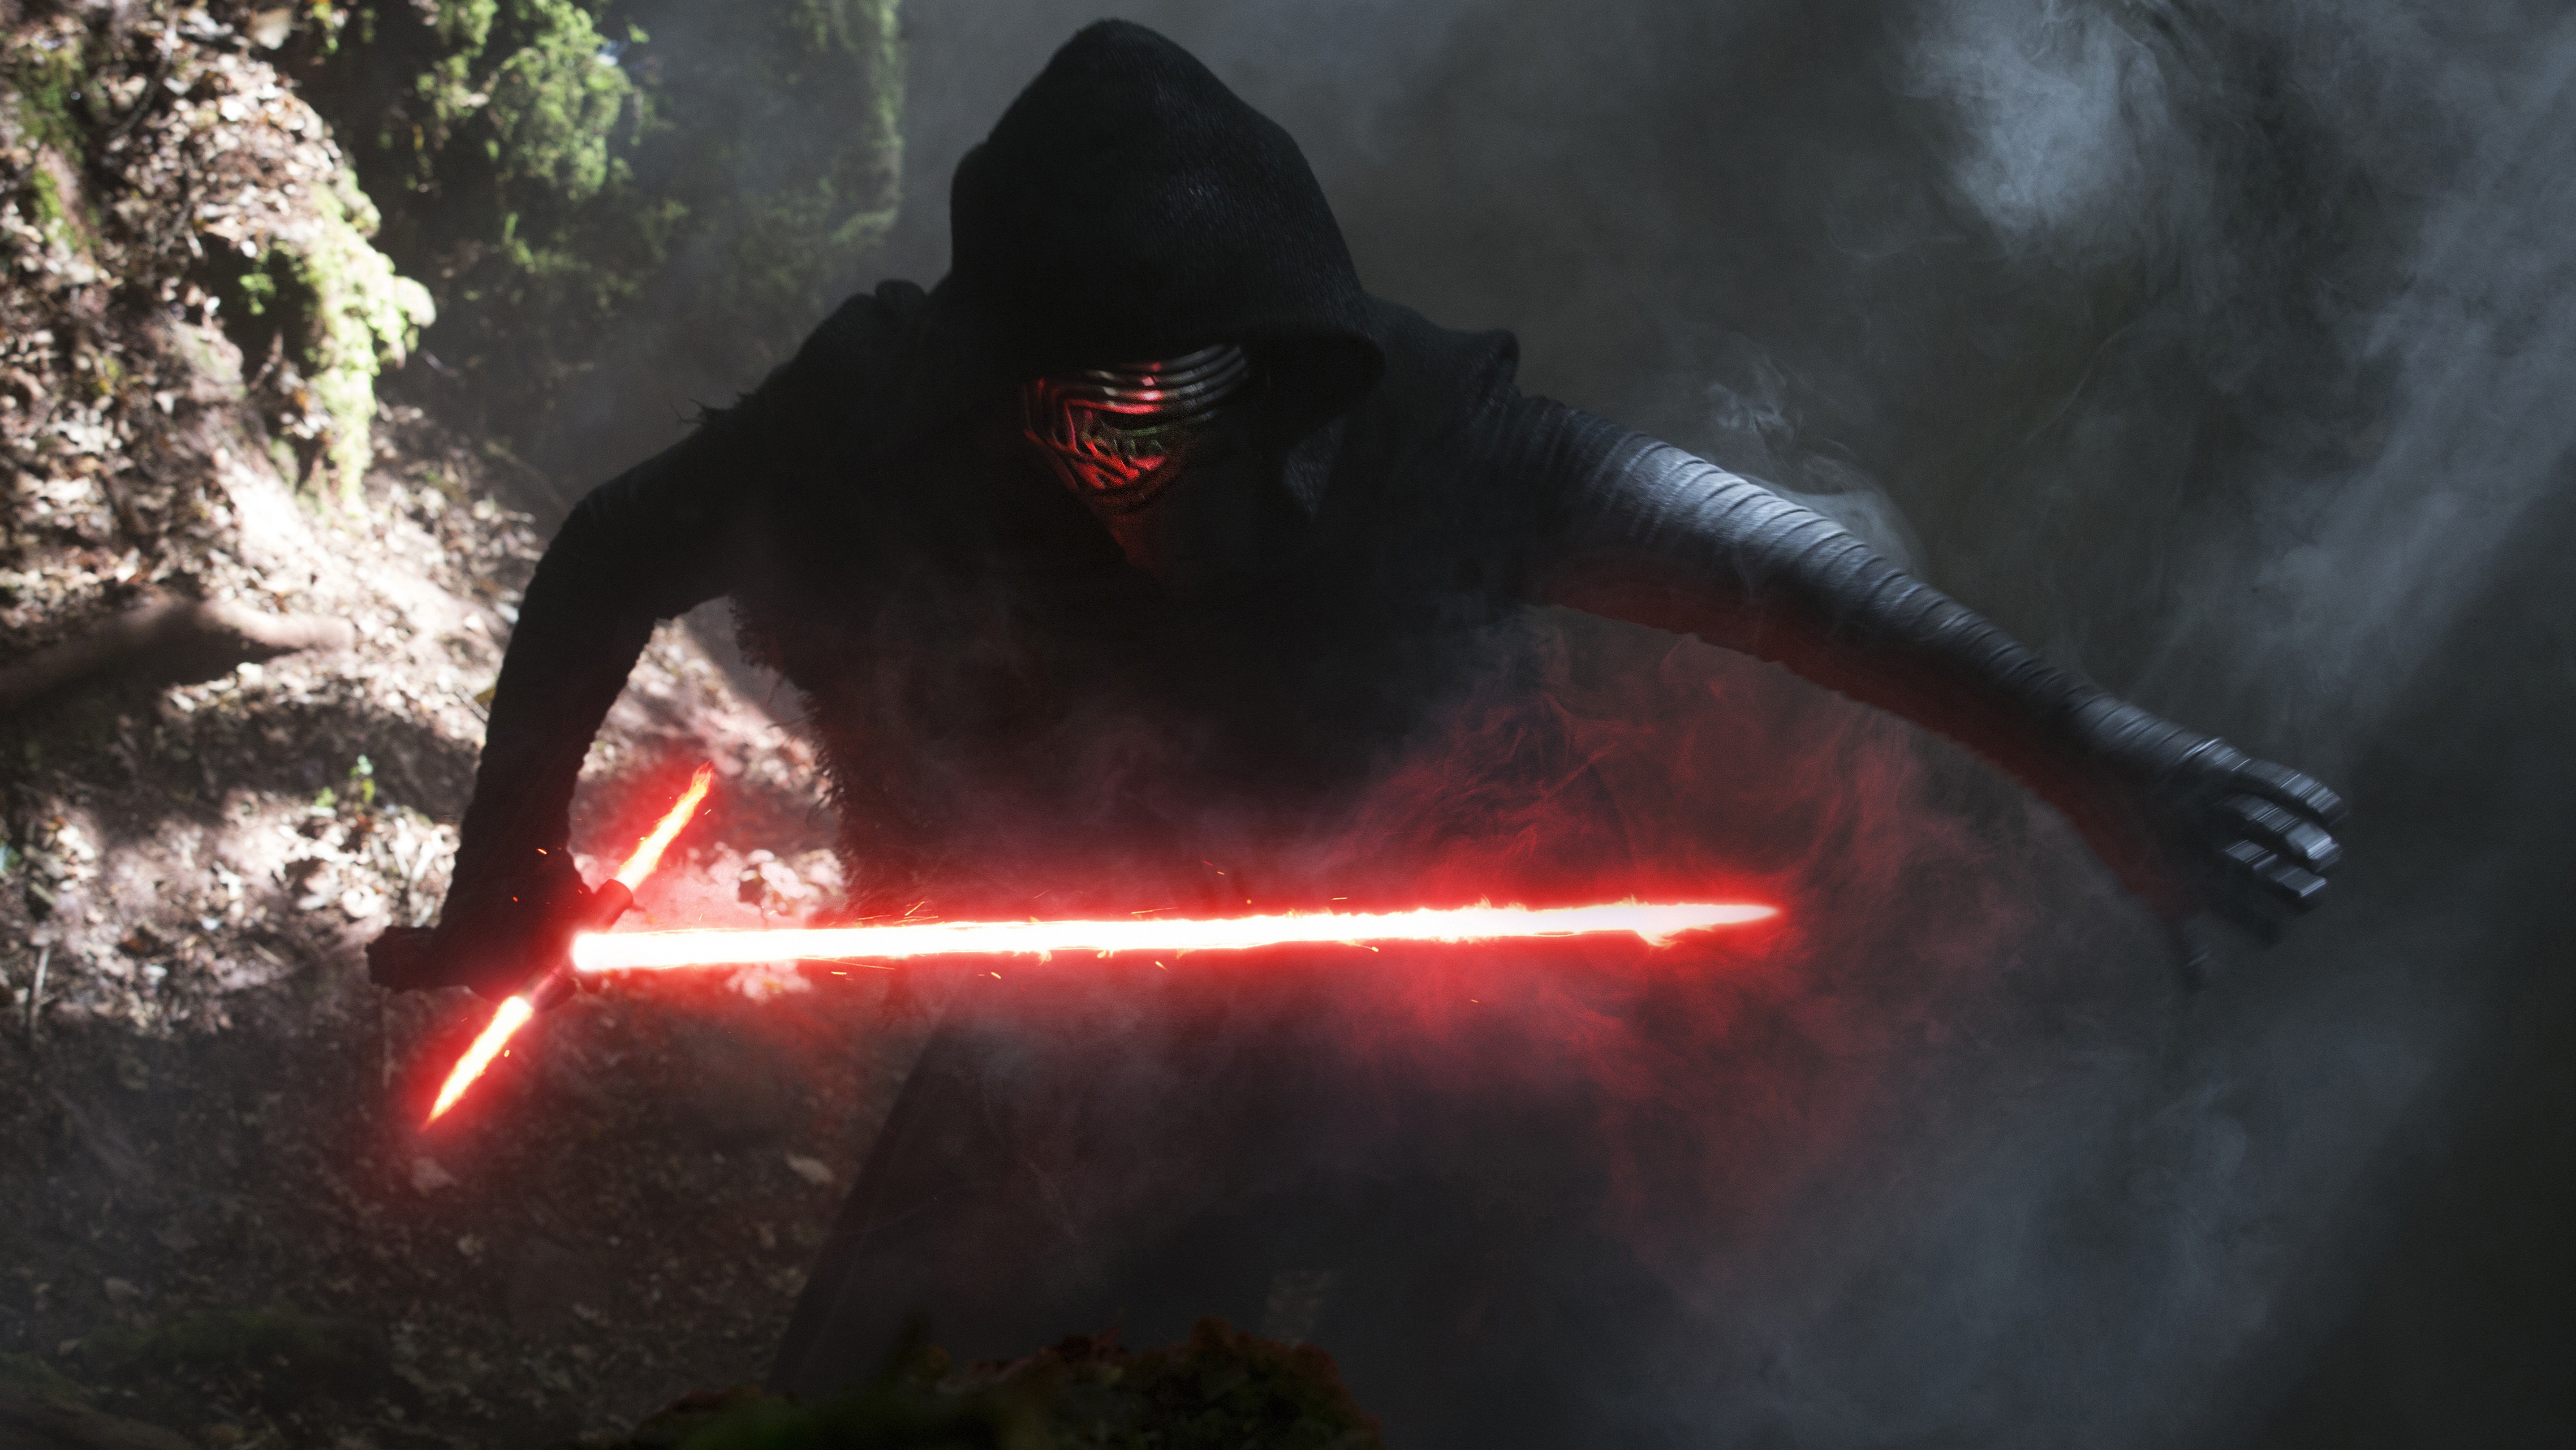 Star Wars Star Wars The Force Awakens Kylo Ren Movies The New Order Star Wars Lightsaber Science Fic 5750x3236